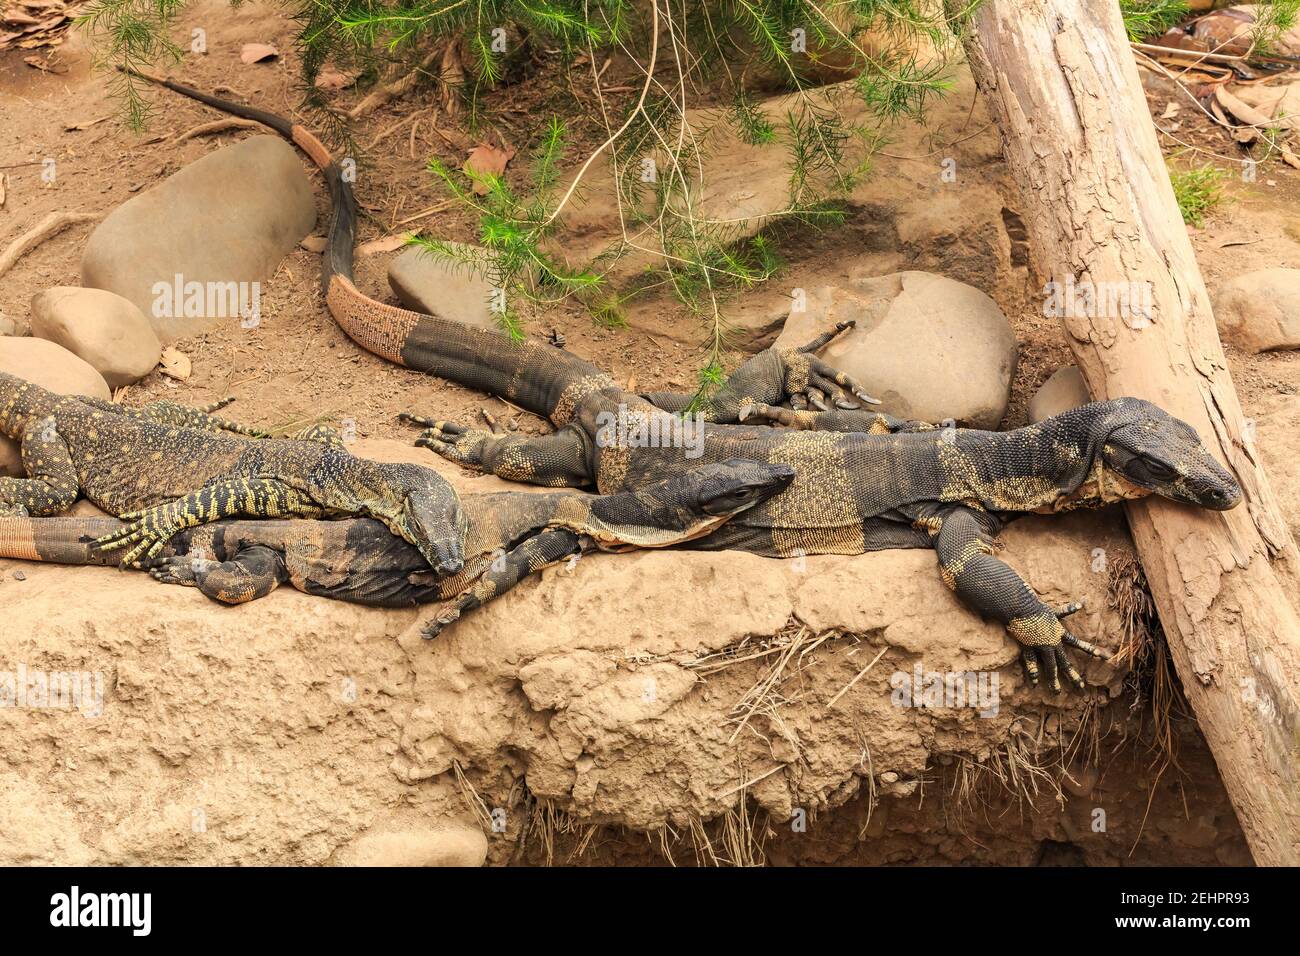 A family of lace monitors, or trees goannas, large reptiles native to Australia, resting together on a riverbank Stock Photo